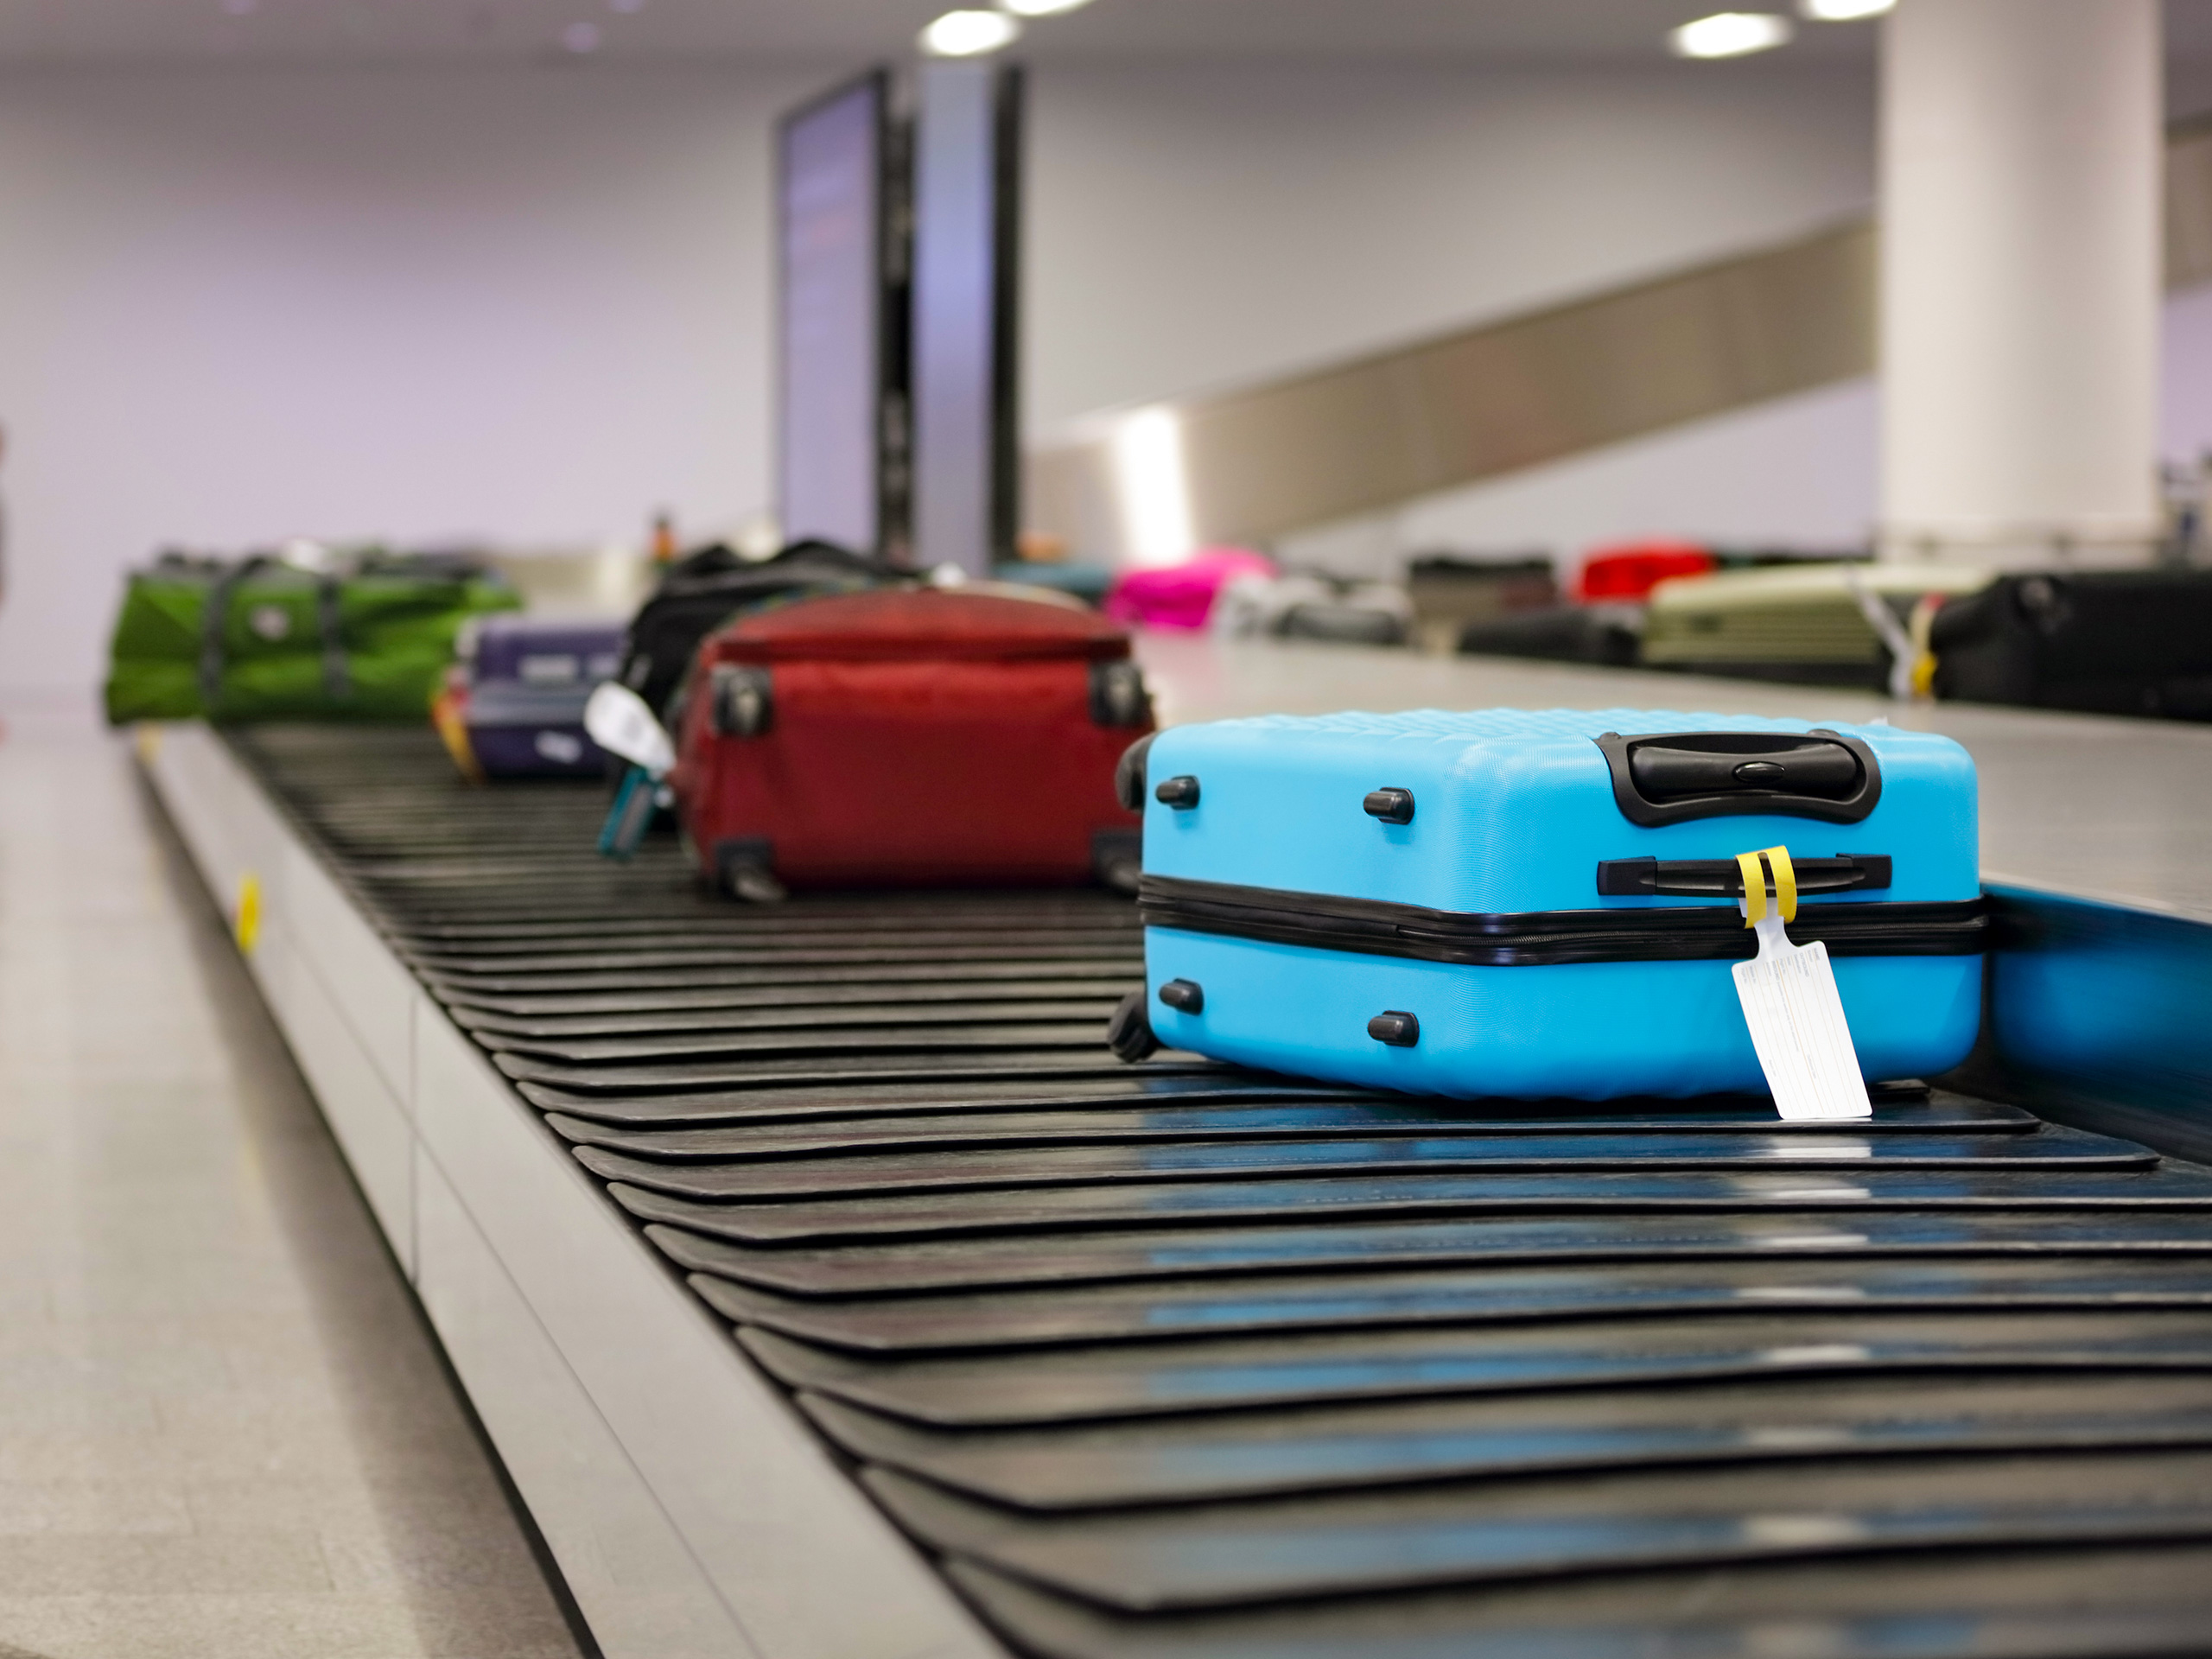 Suitcases on baggage claim